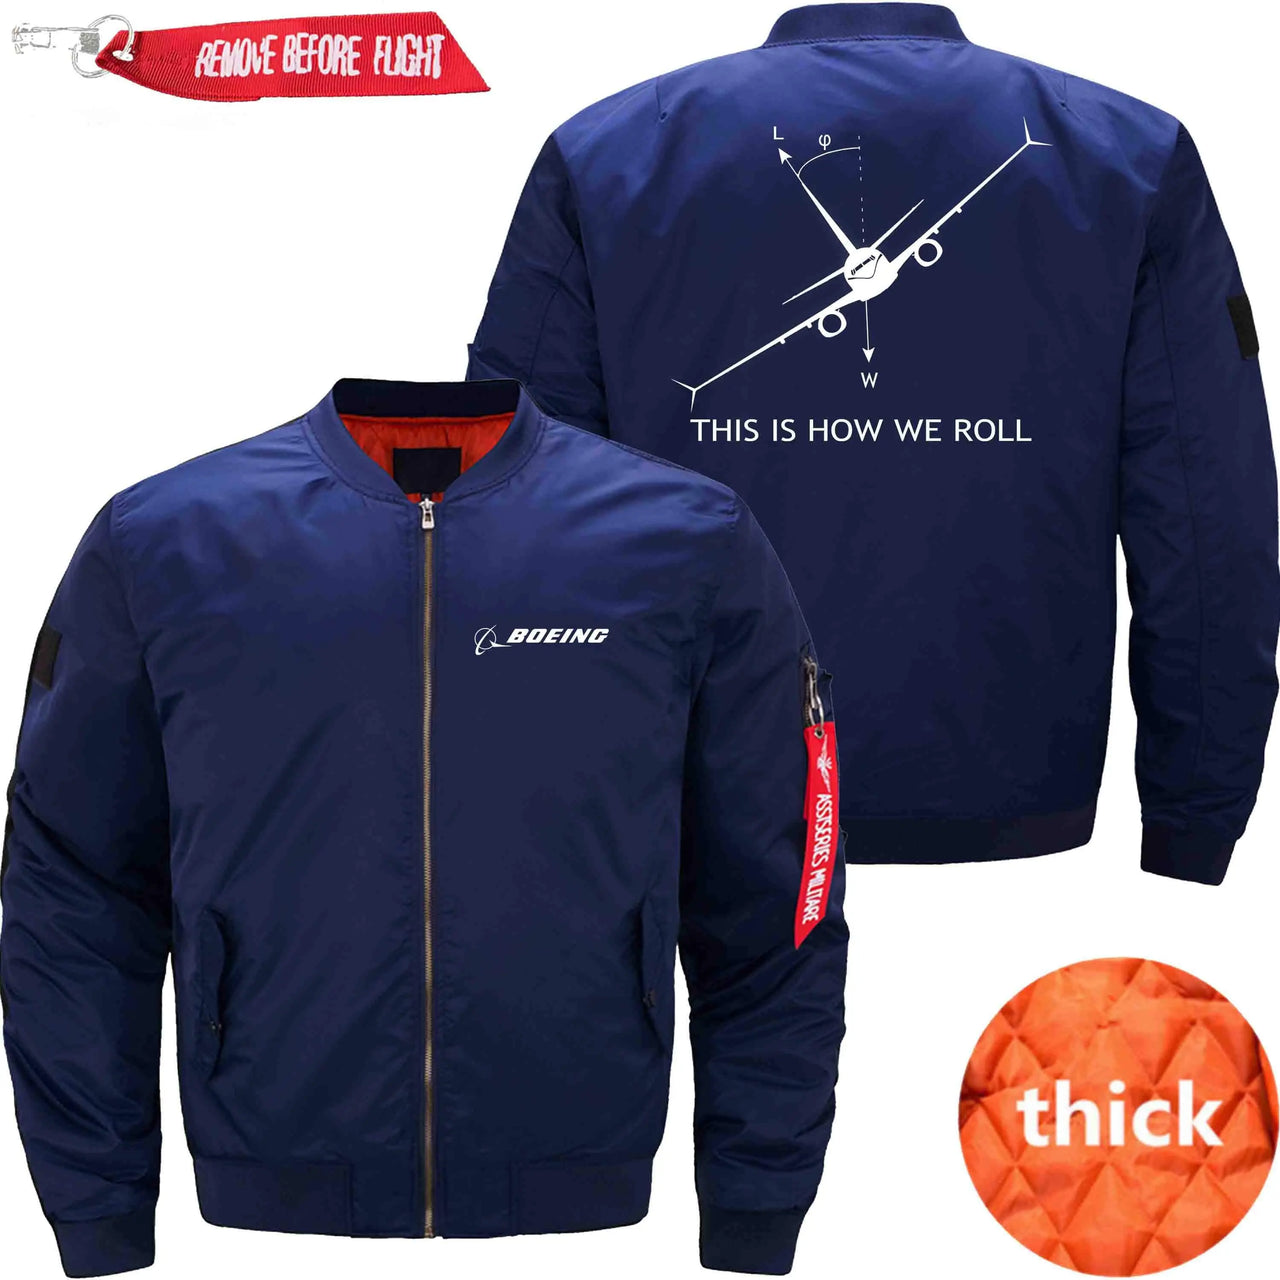 THIS IS HOW WE ROLL B737 - JACKET THE AV8R